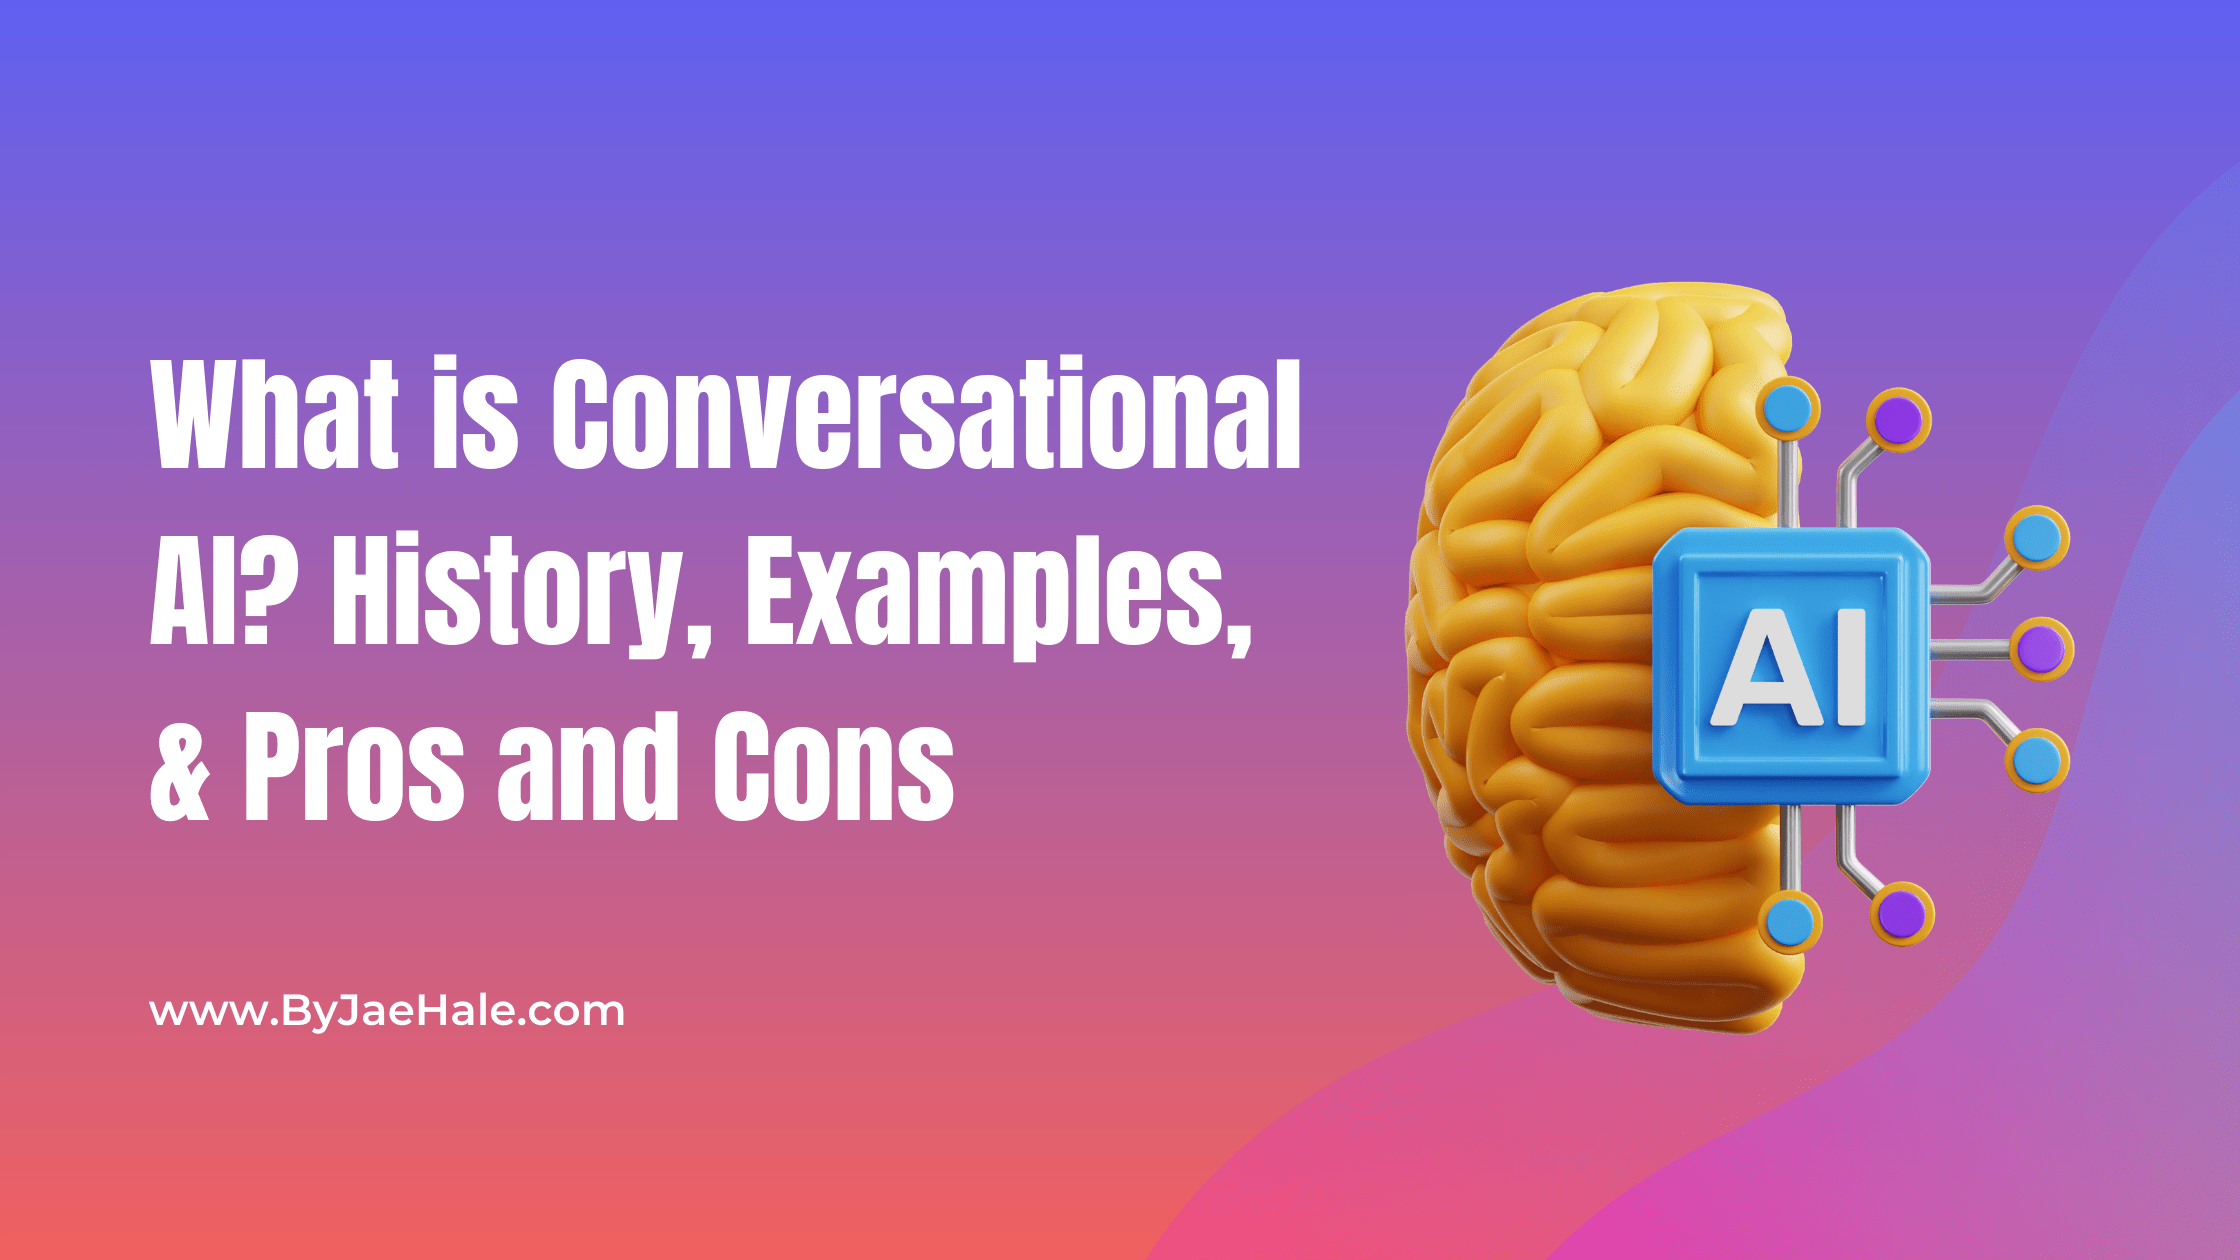 what is conversational ai